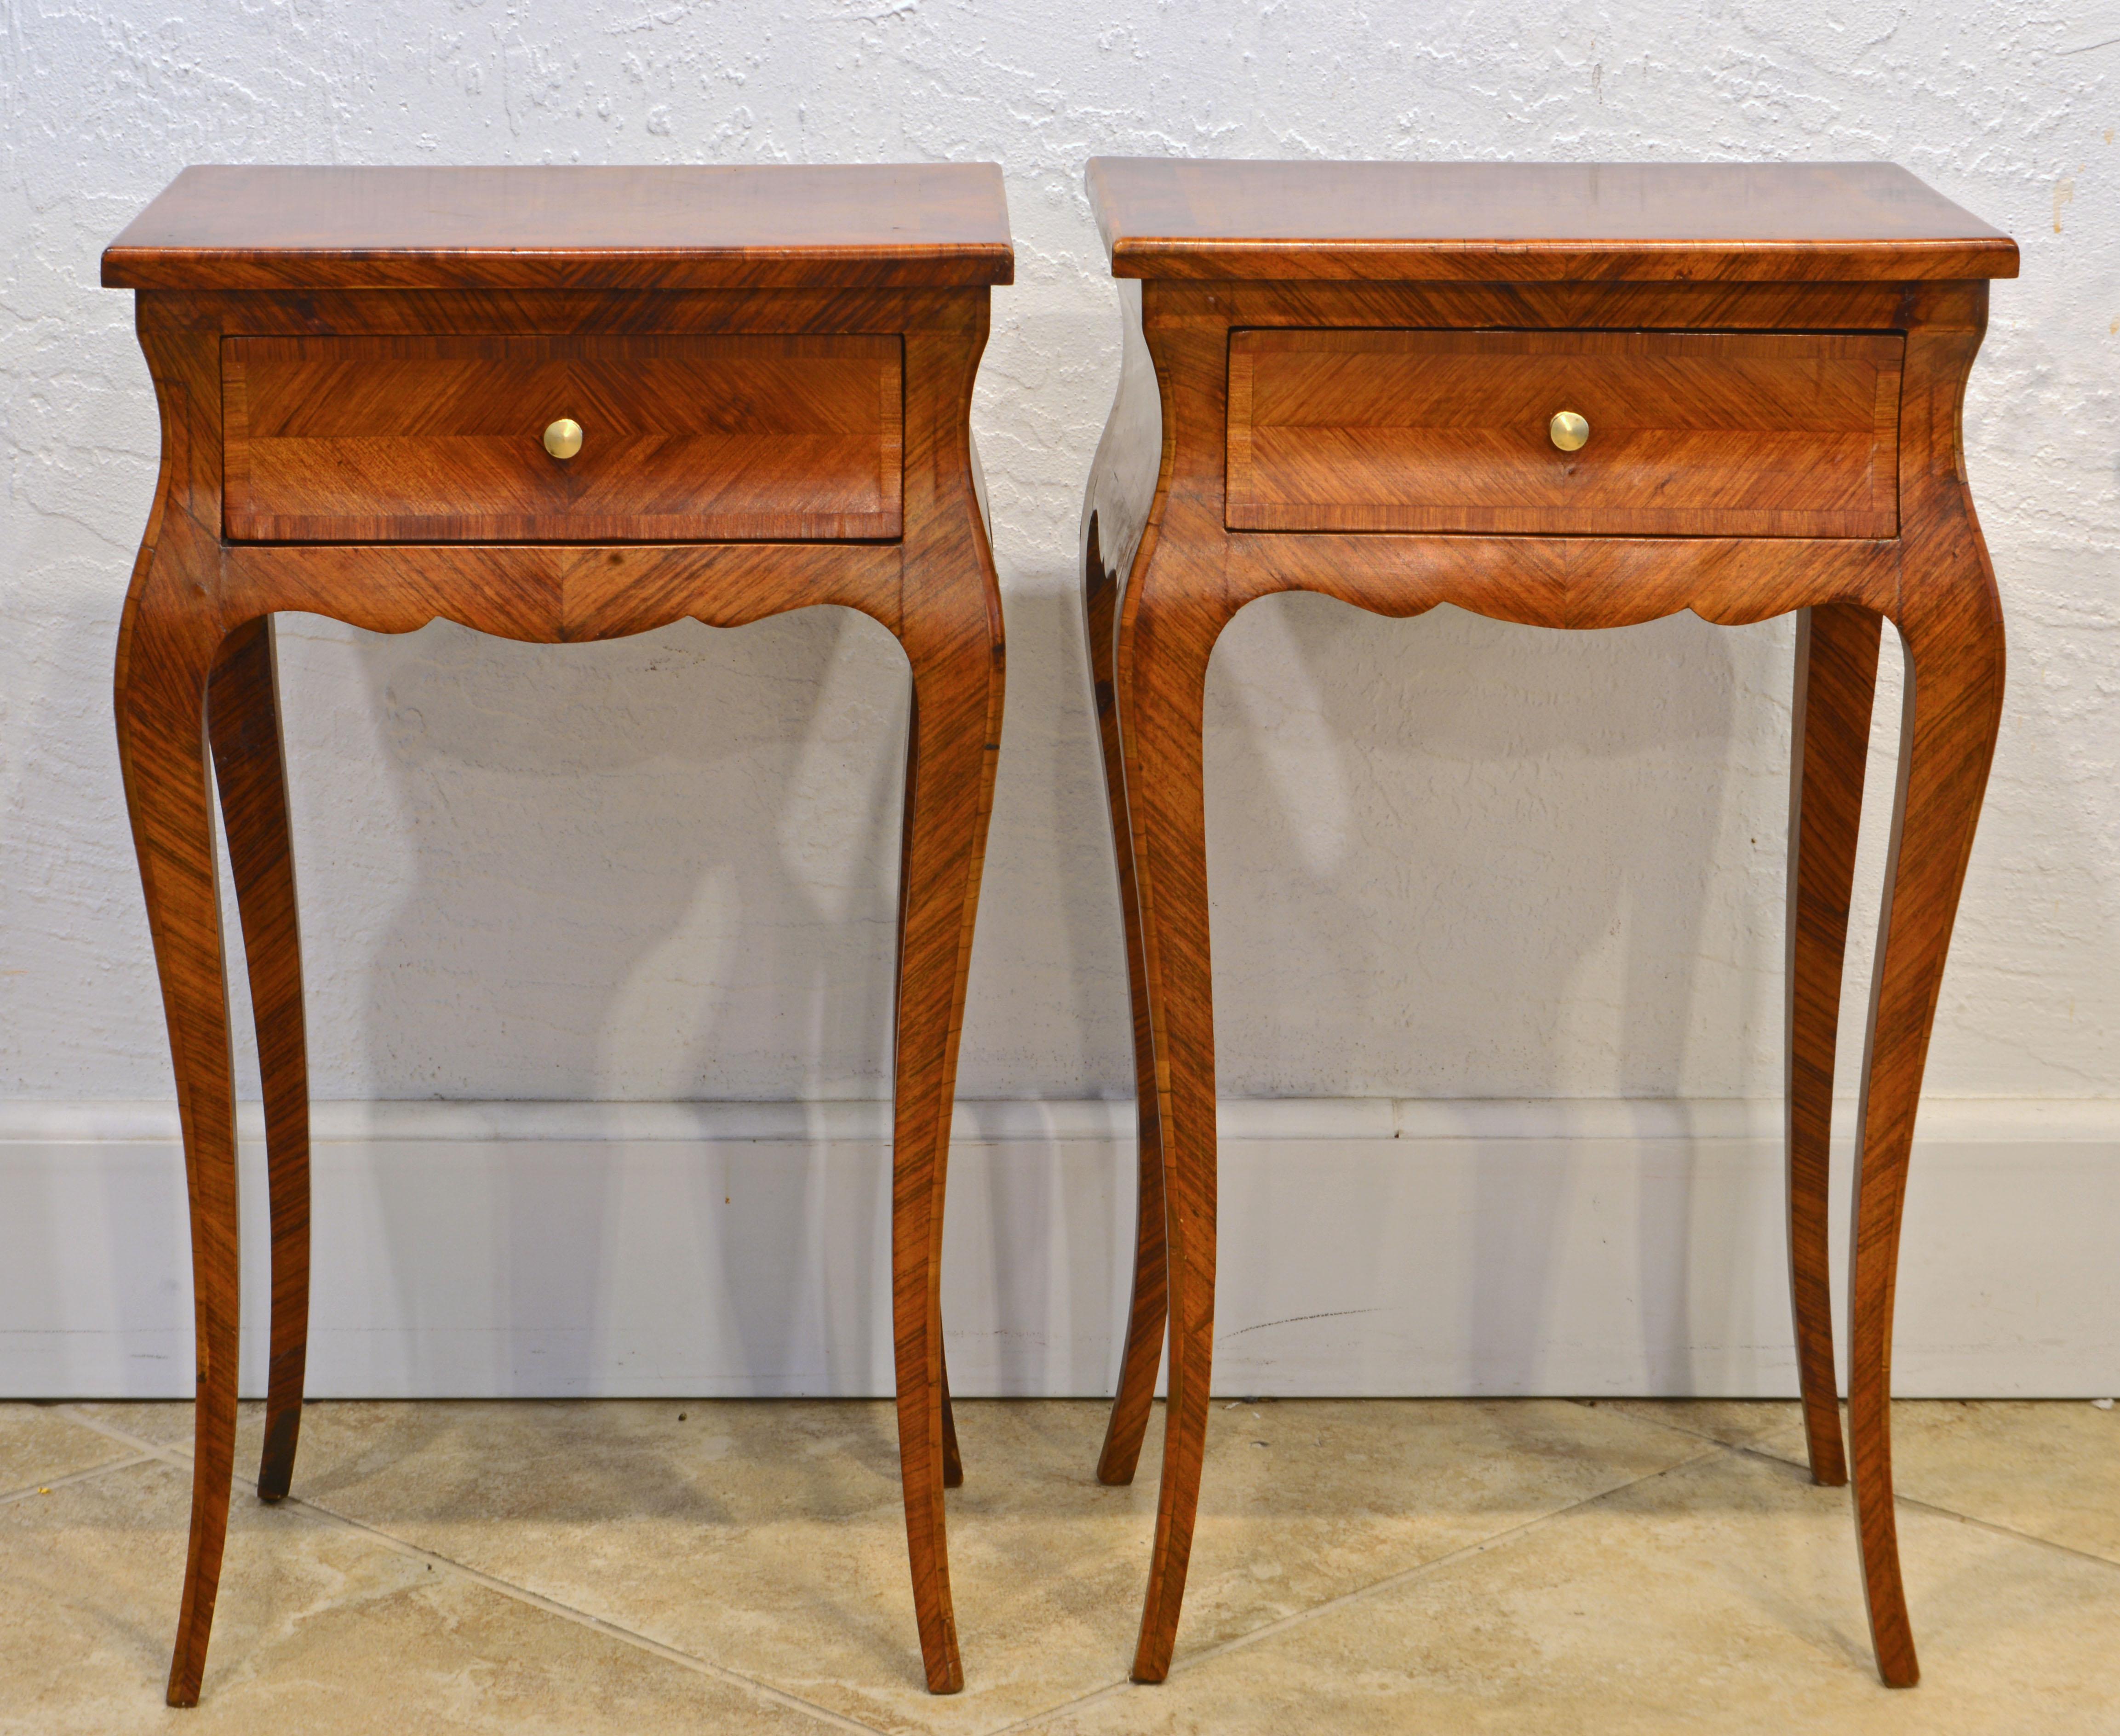 Elegant lines, petite proportions and parquetry surfaces make this pair of French Louis XV style petite commodes especially attractive. The tops centering a ribbon inlay have a drawer underneath and the scalloped aprons continue in the four cabriole